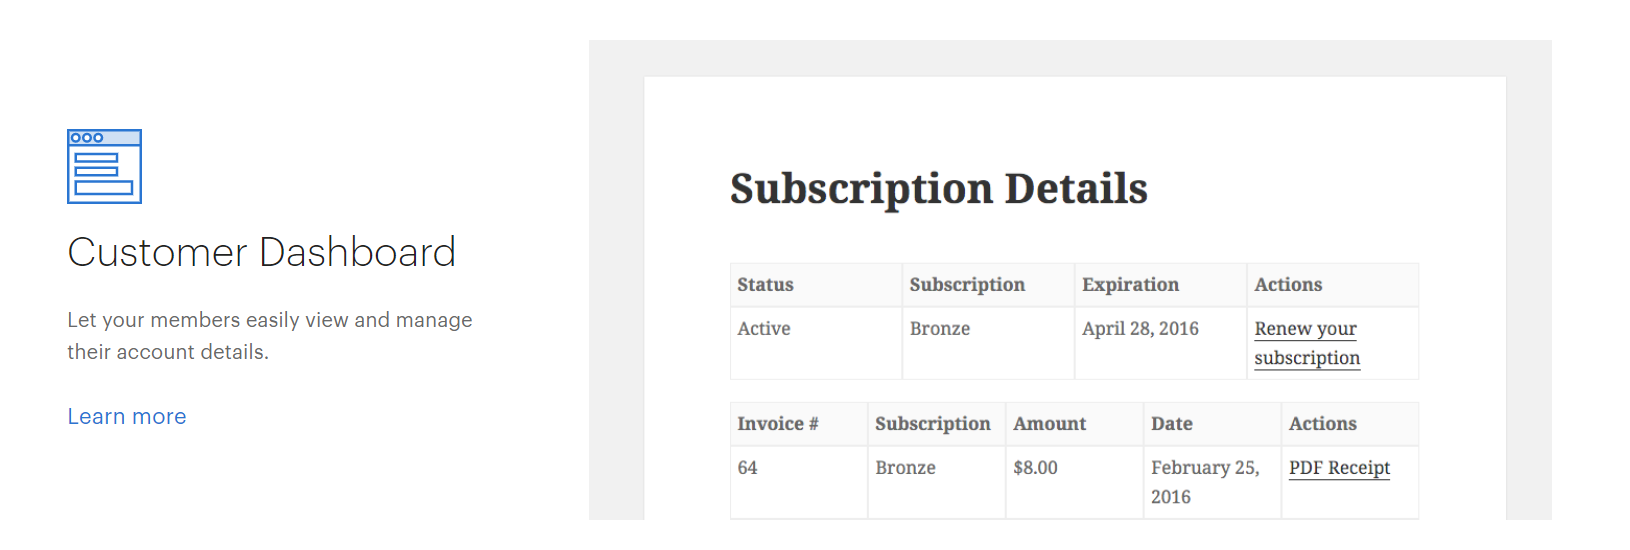 Subscription Reports